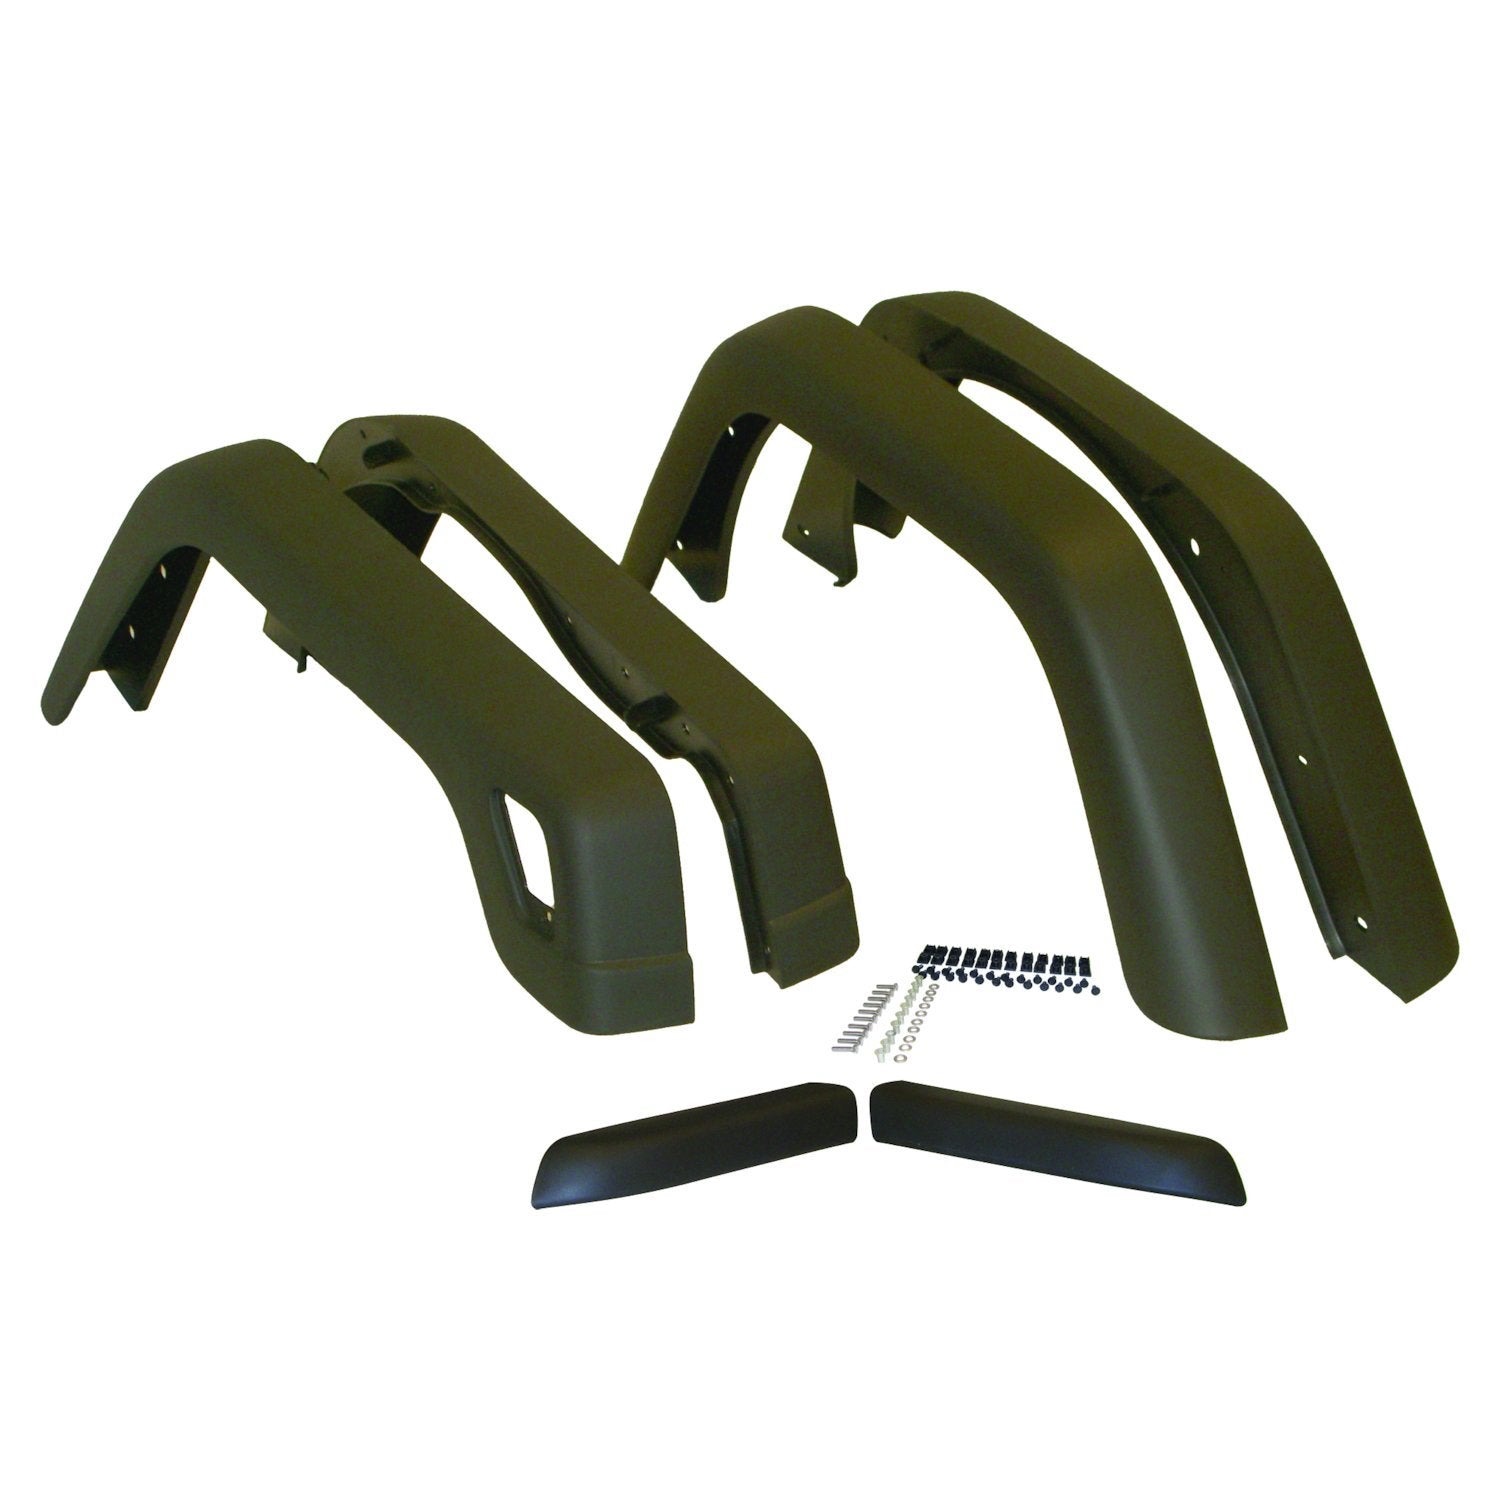 Fender Flare Kit, Left and Right, Front & Rear, Black Textured, 3-3/4